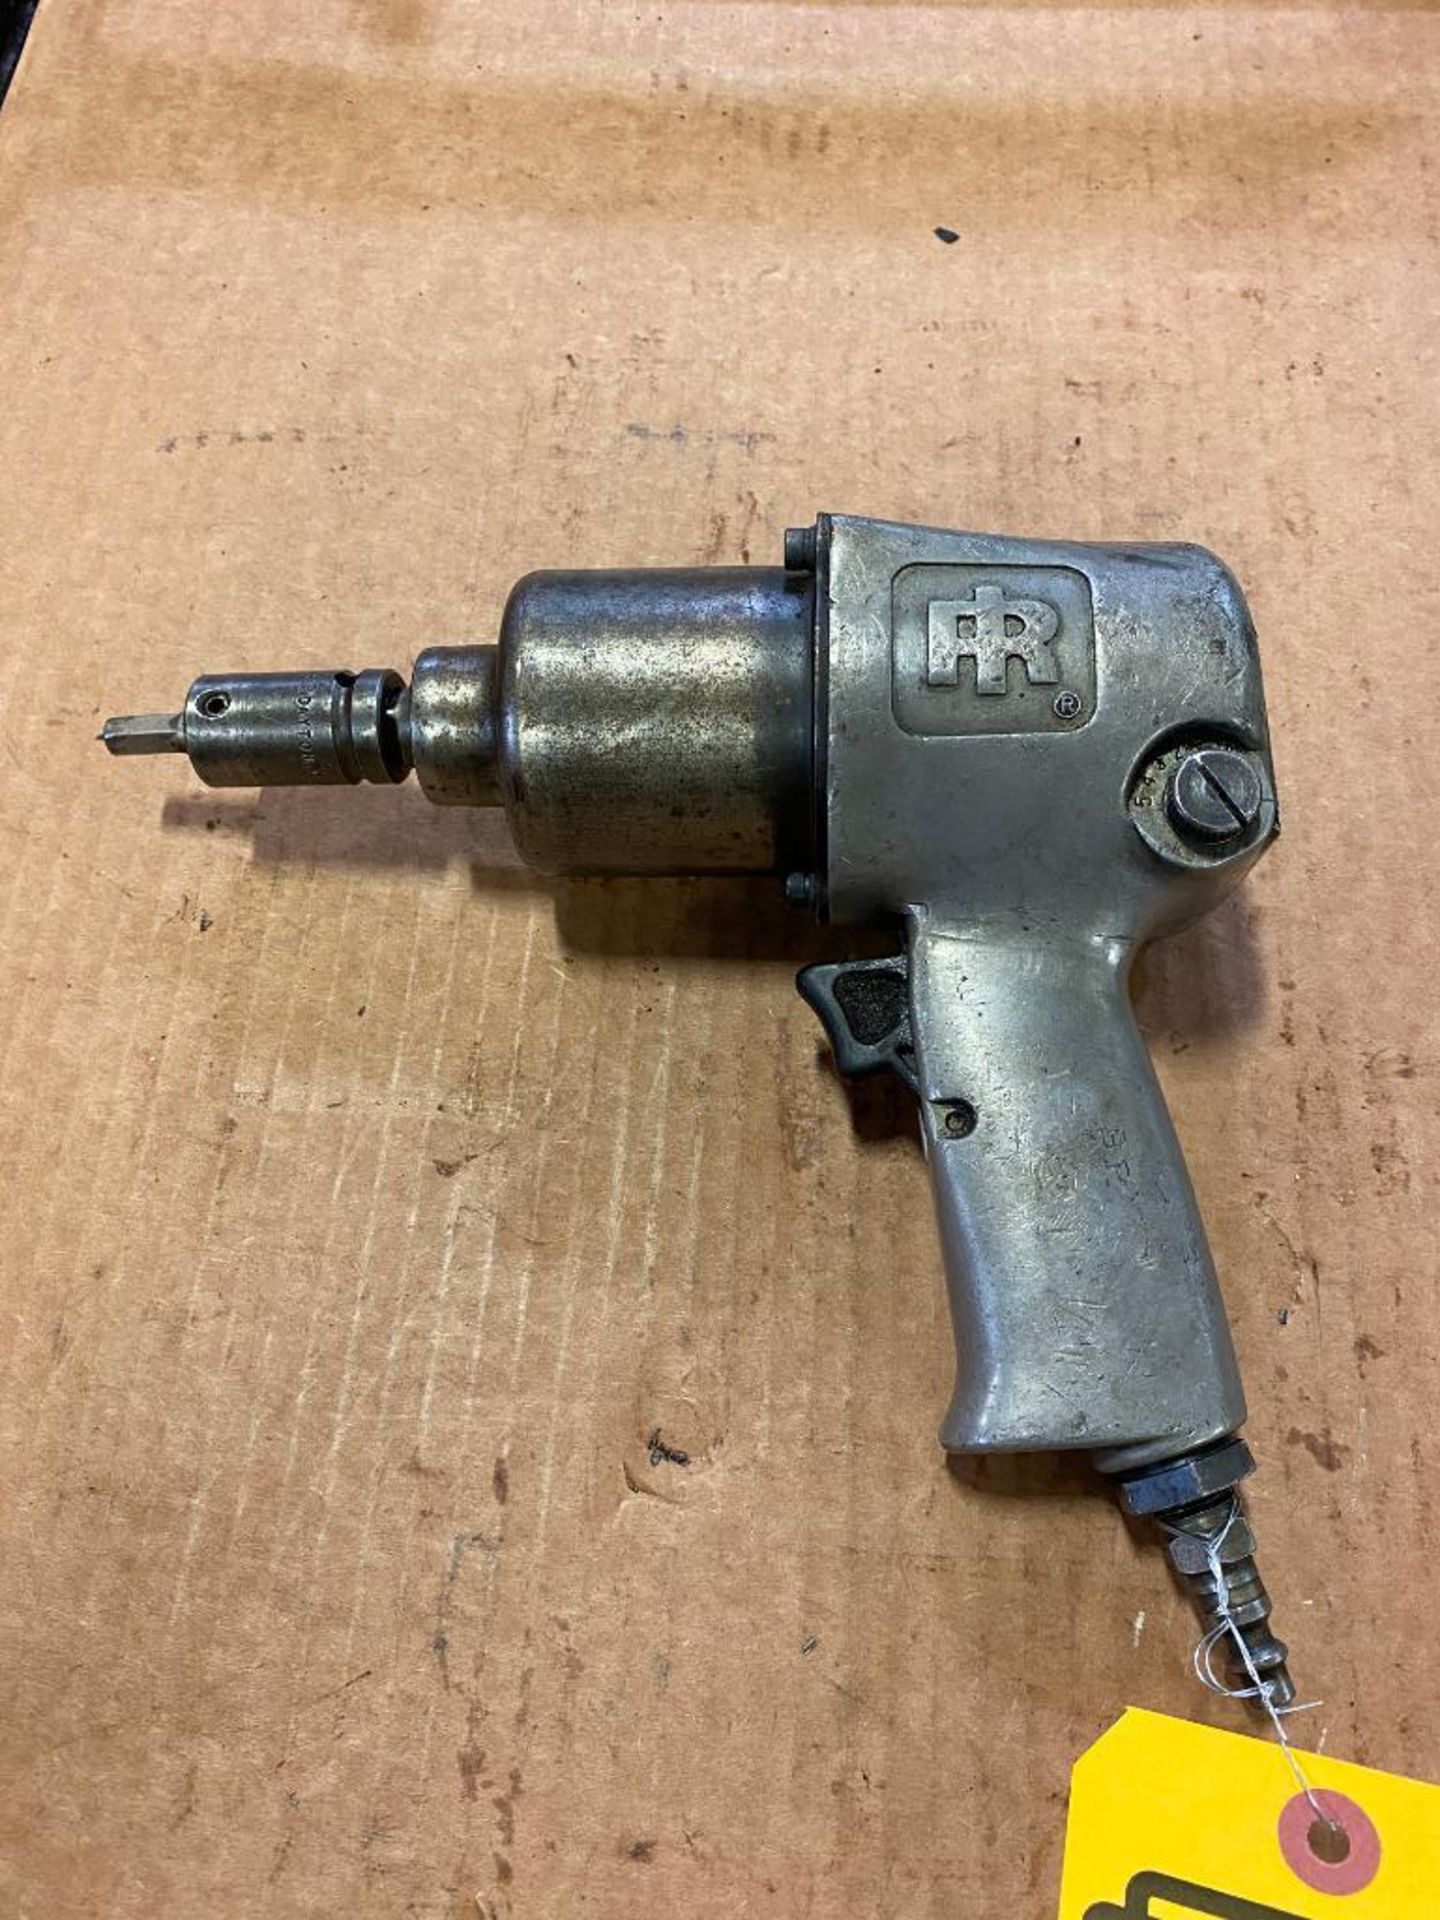 Ingersoll Rand 1/2" Pneumatic Impact Wrench